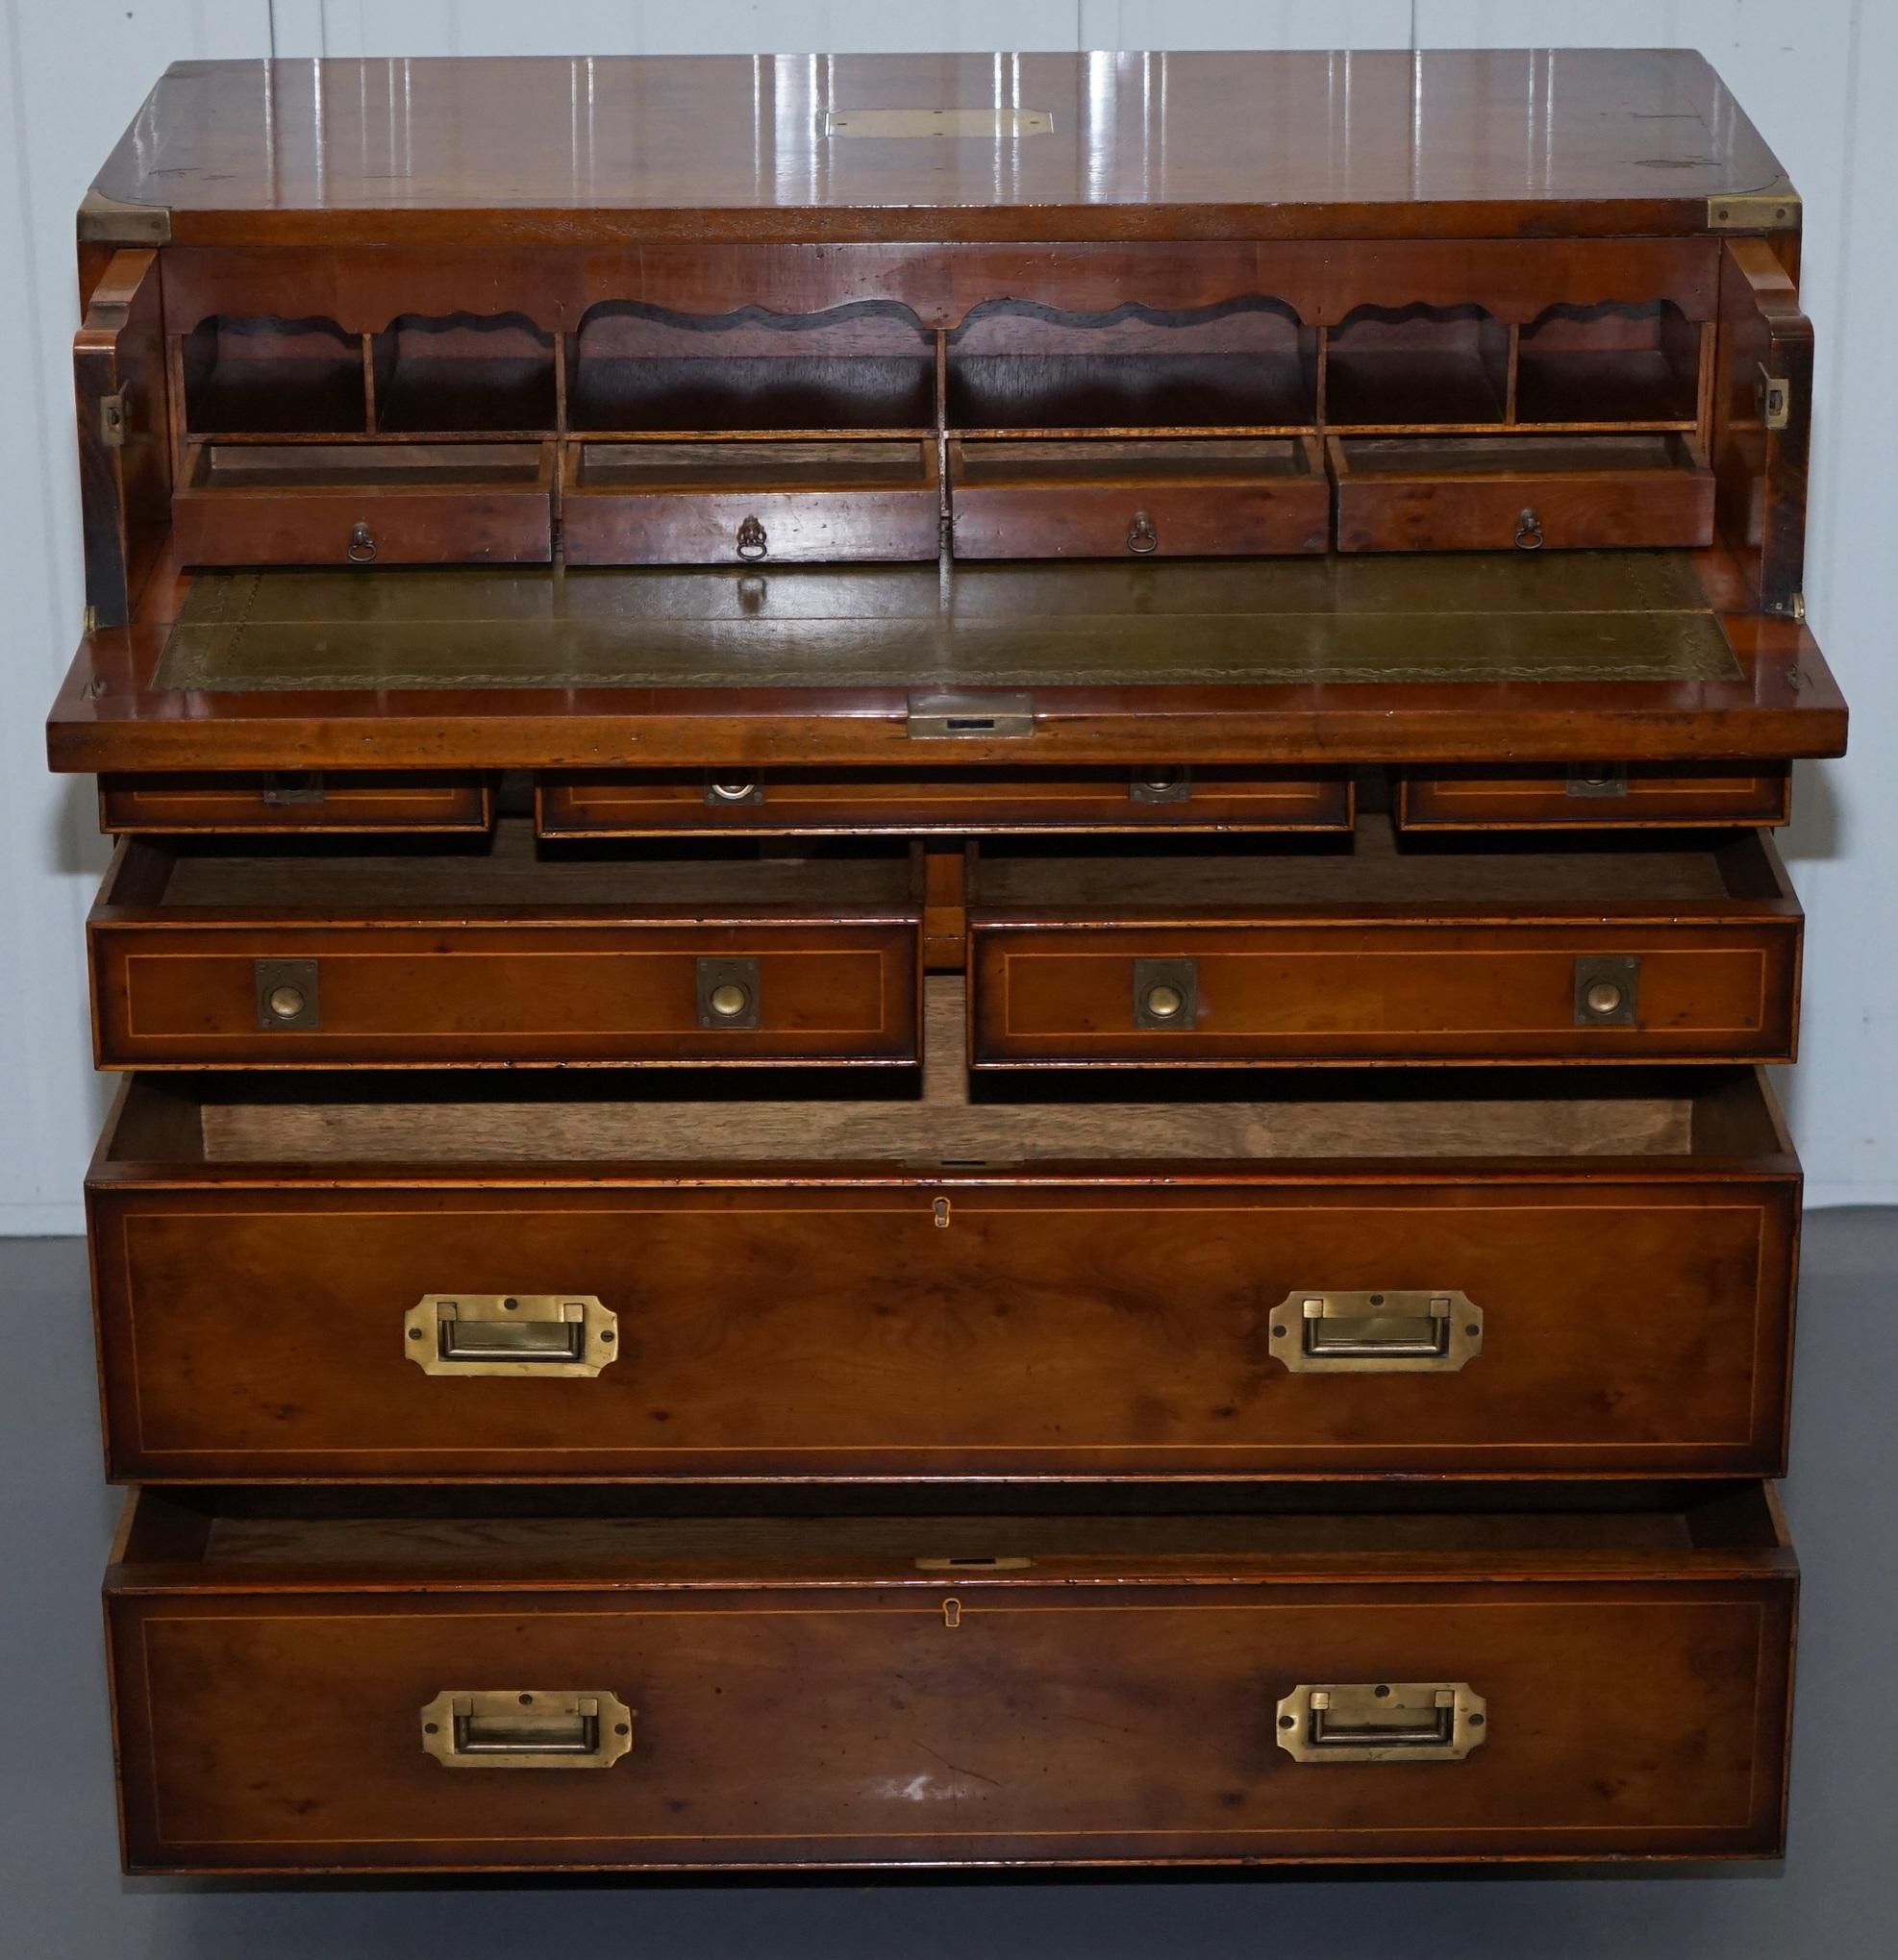 Lovely Burr Yew Wood Military Campaign Chest of Drawers Built in Drop Front Desk 9